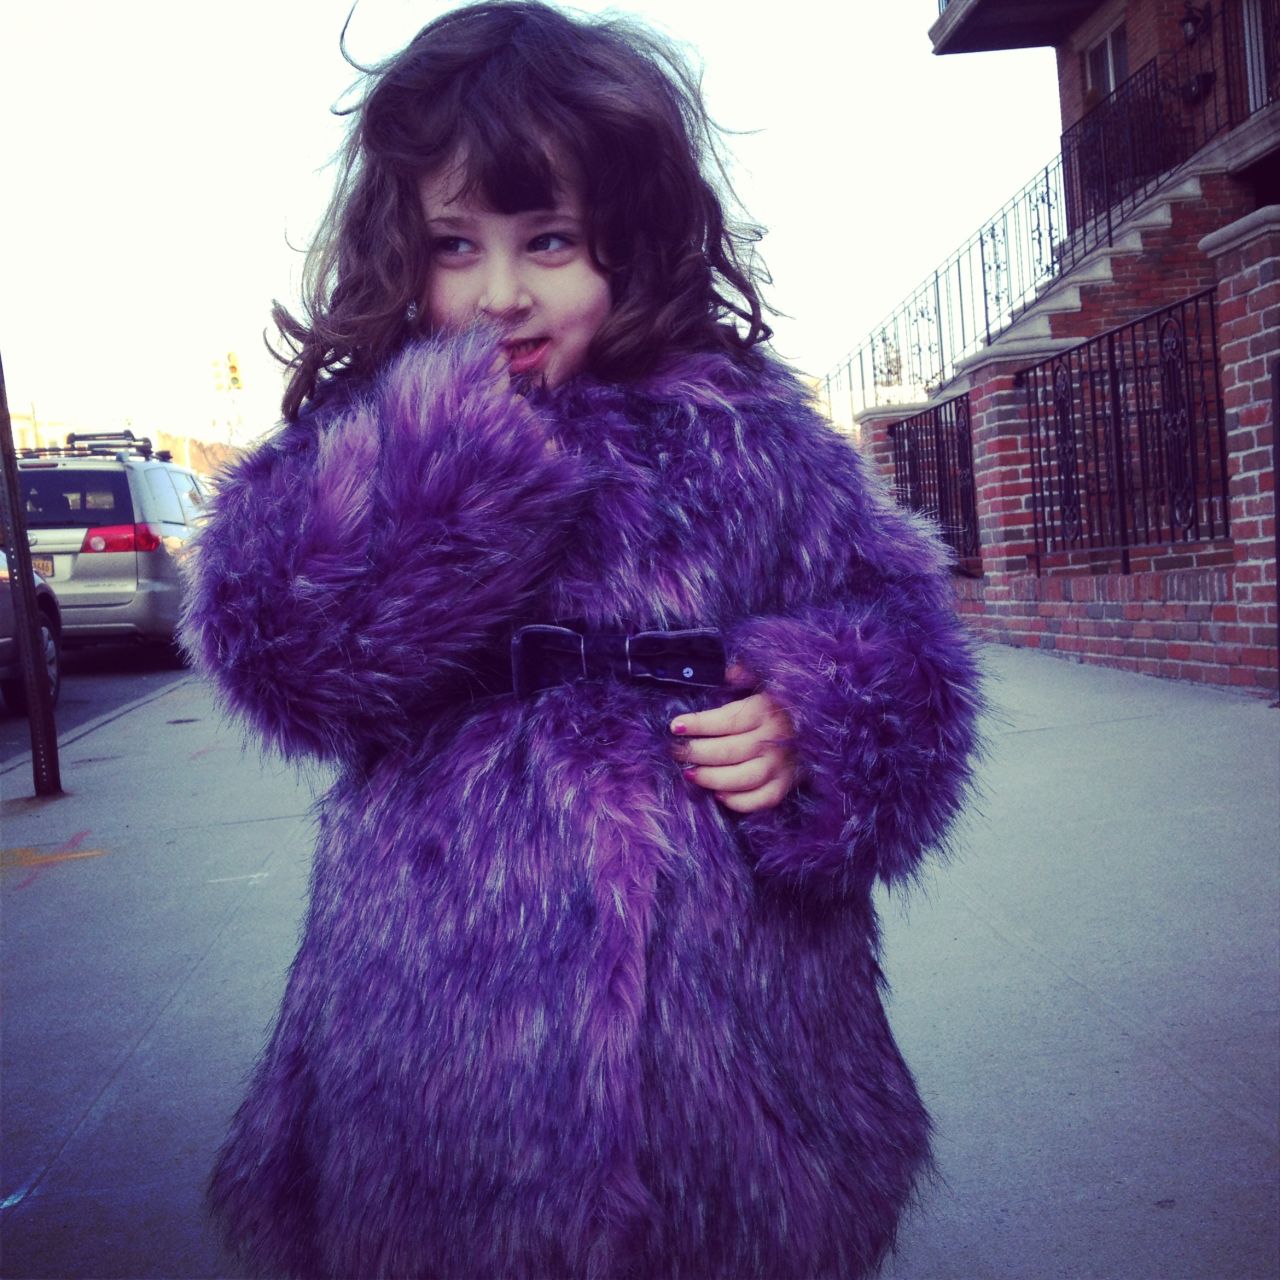 The latest craze of parents' photos floating around the Internet: children with style and swag. By now you might have seen a Tumblr or Pinterest board with pictures of toddlers striking sassy poses. Julia Samersova, a casting director and blogger who runs "Planet Awesome Kid" in Brooklyn, sees kid swagger in her neighborhood every day. Here, her own daughter, Violet, strikes a pose in a purple furry coat.